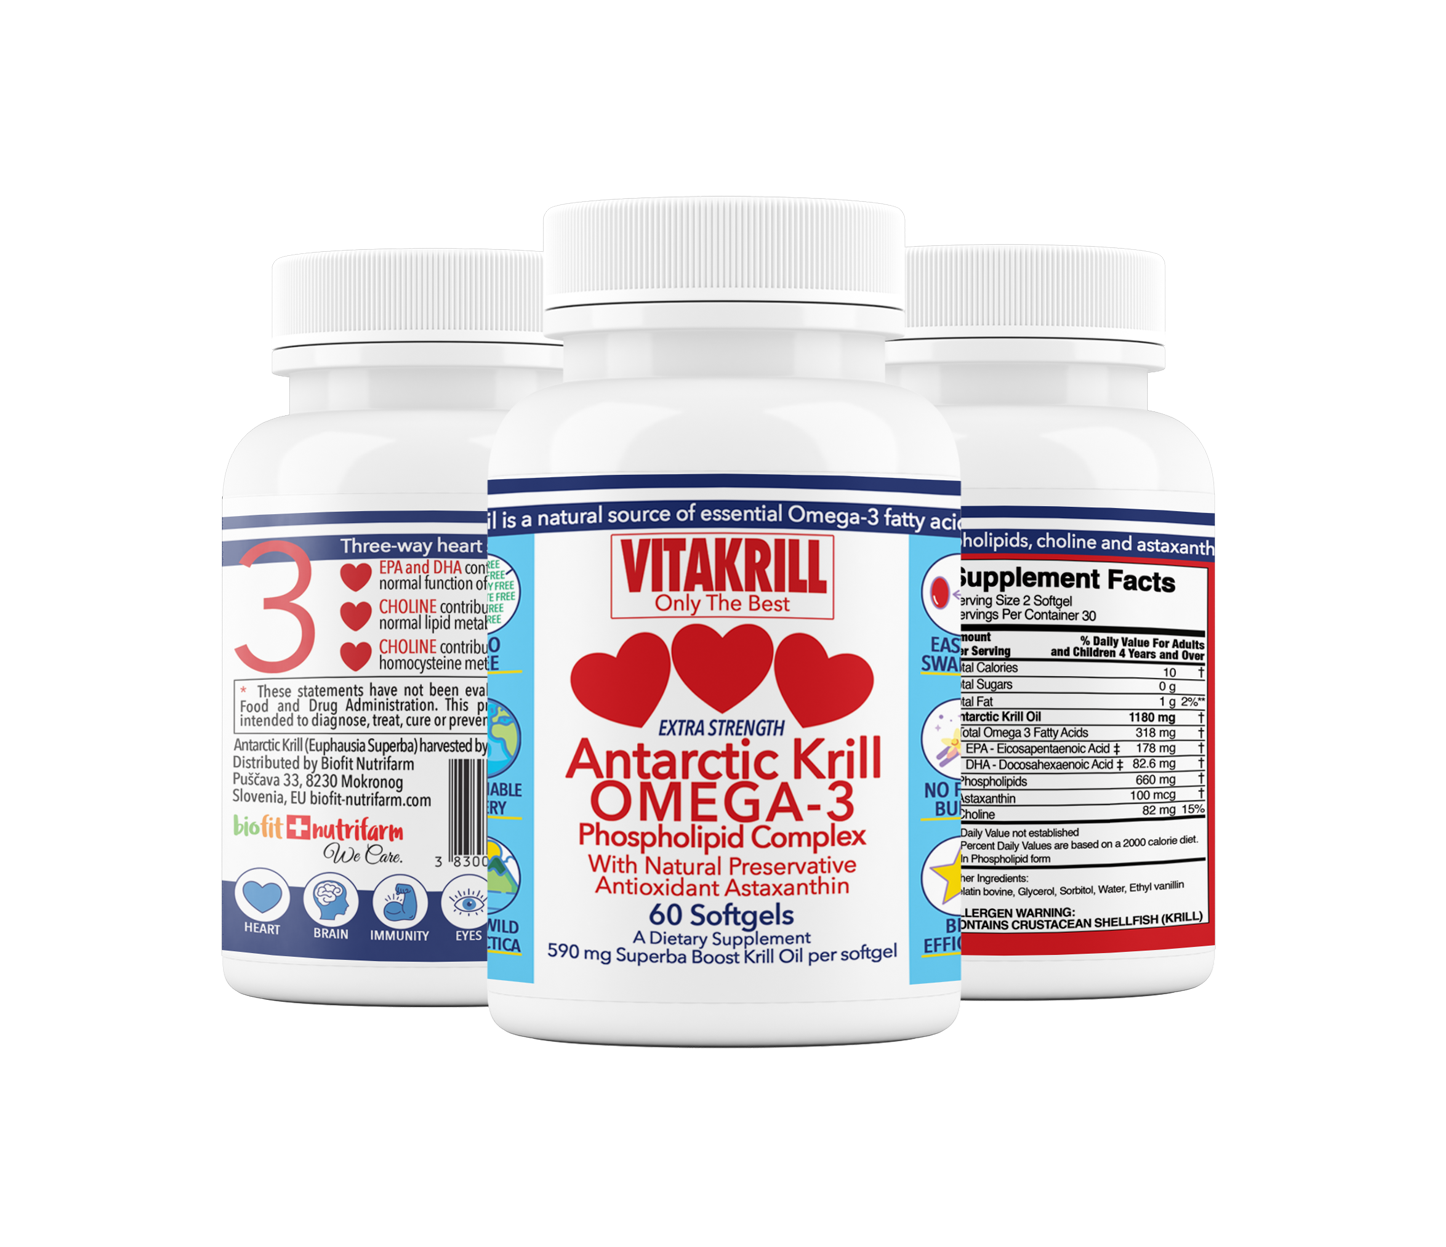 Vitakrill Only The Best krill oil omega 3 phospholipid complex with astaxanthin